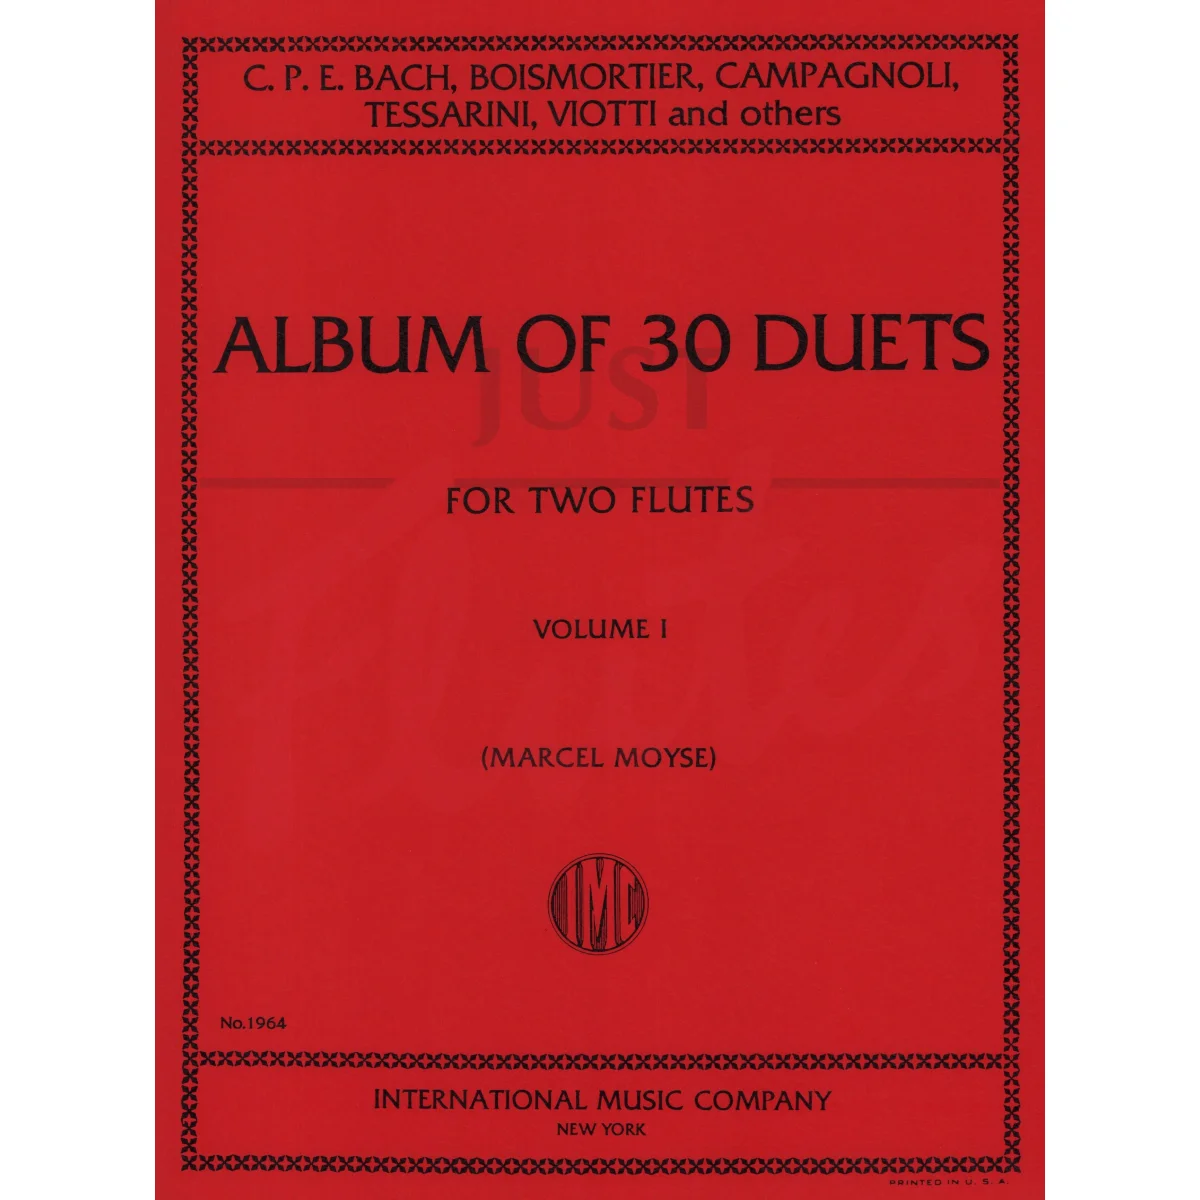 Album of 30 Duets for Two Flutes, Vol 1